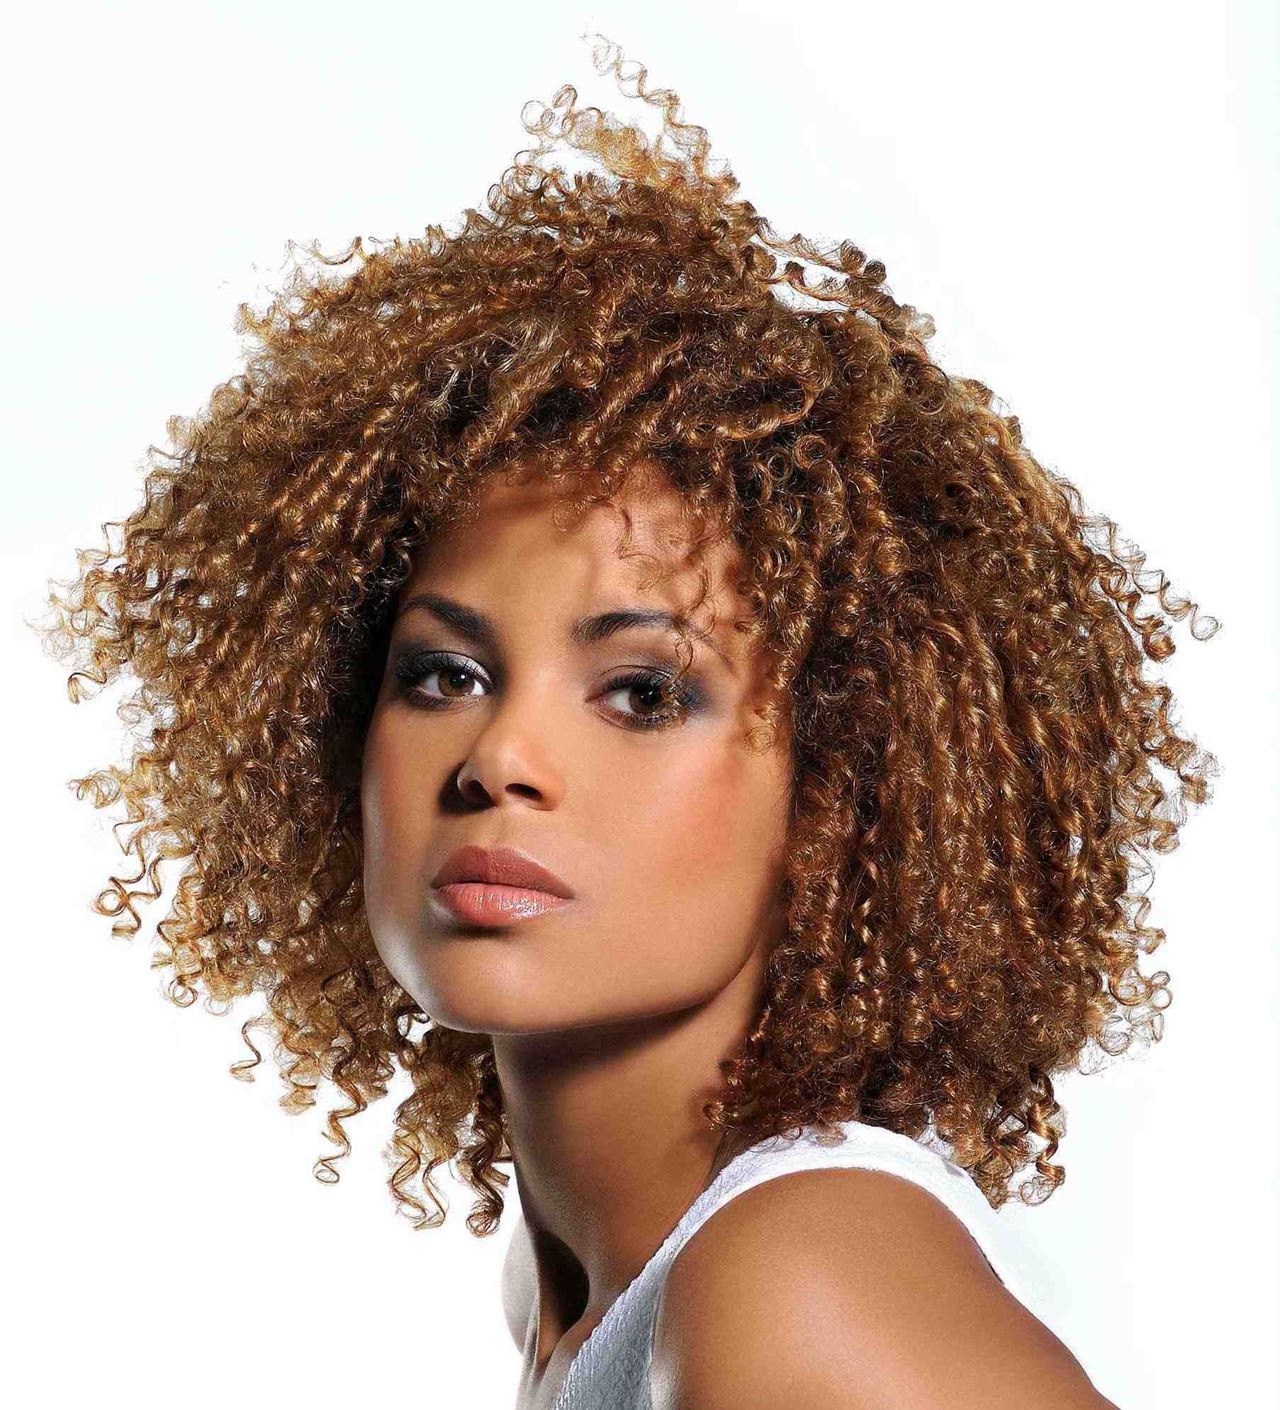 10 things a girl with curly hair can't do